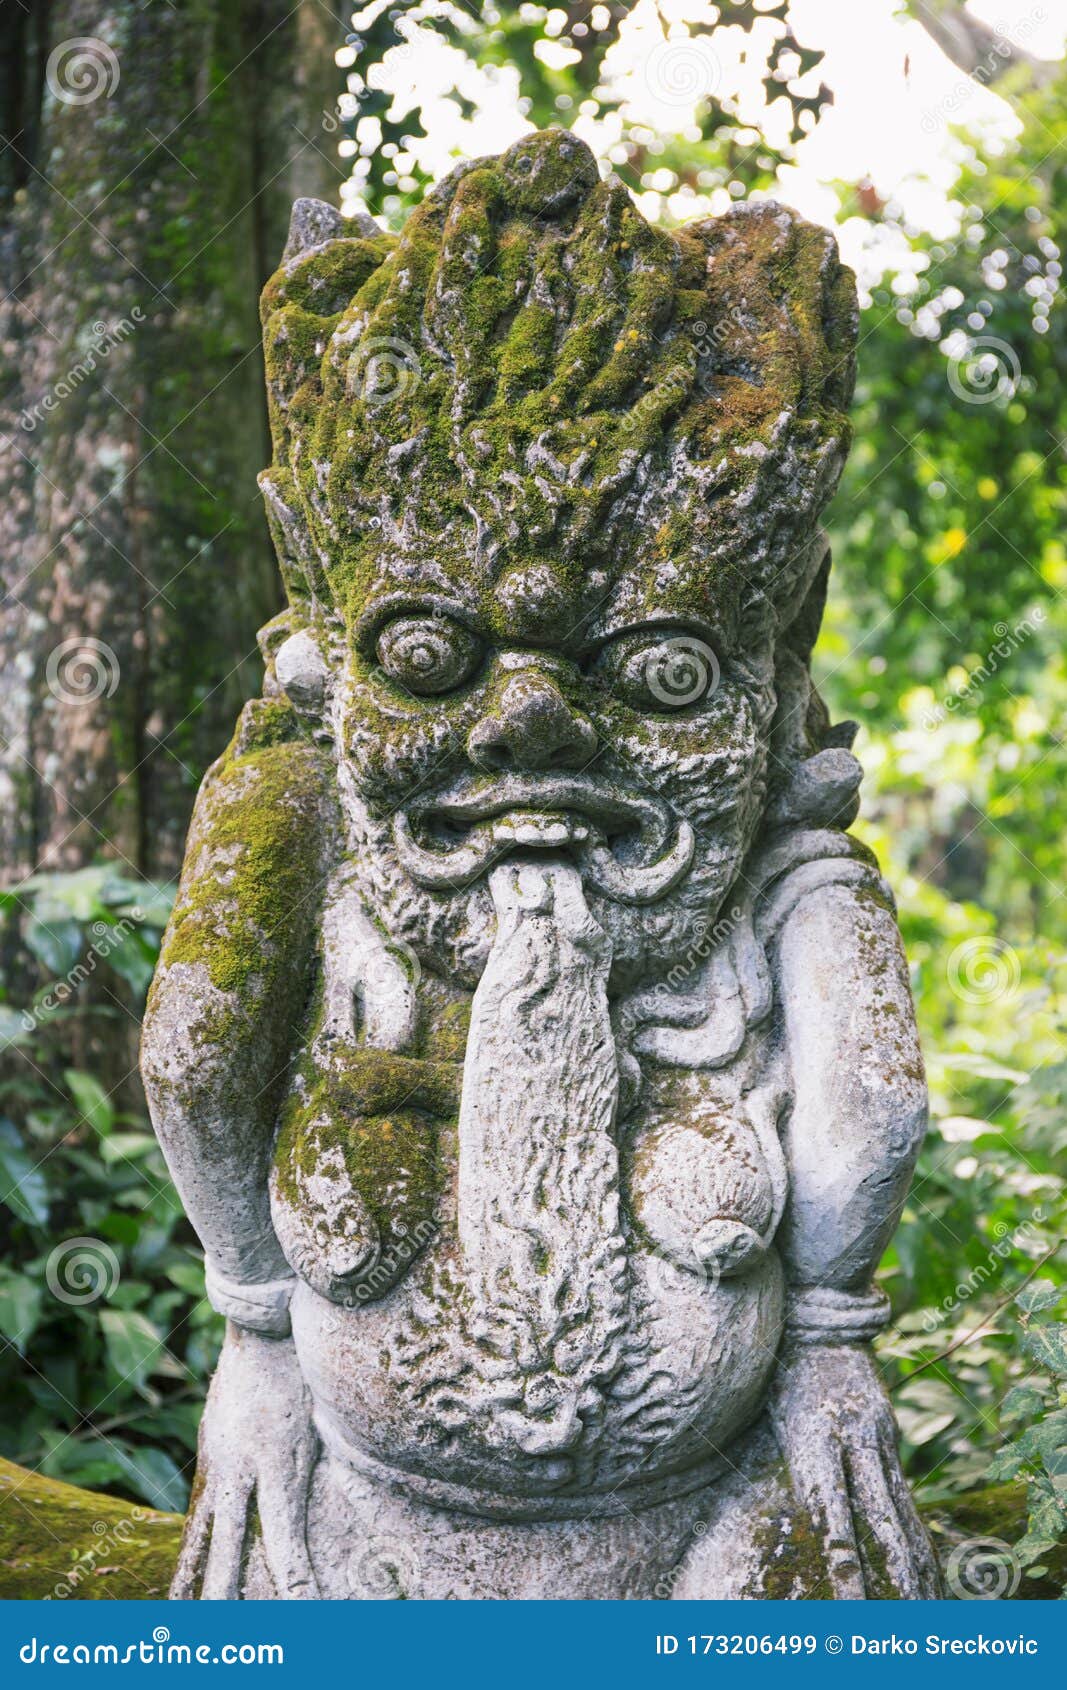 Traditional Stone Statues in Bali,Indonesia Stock Image - Image of ...